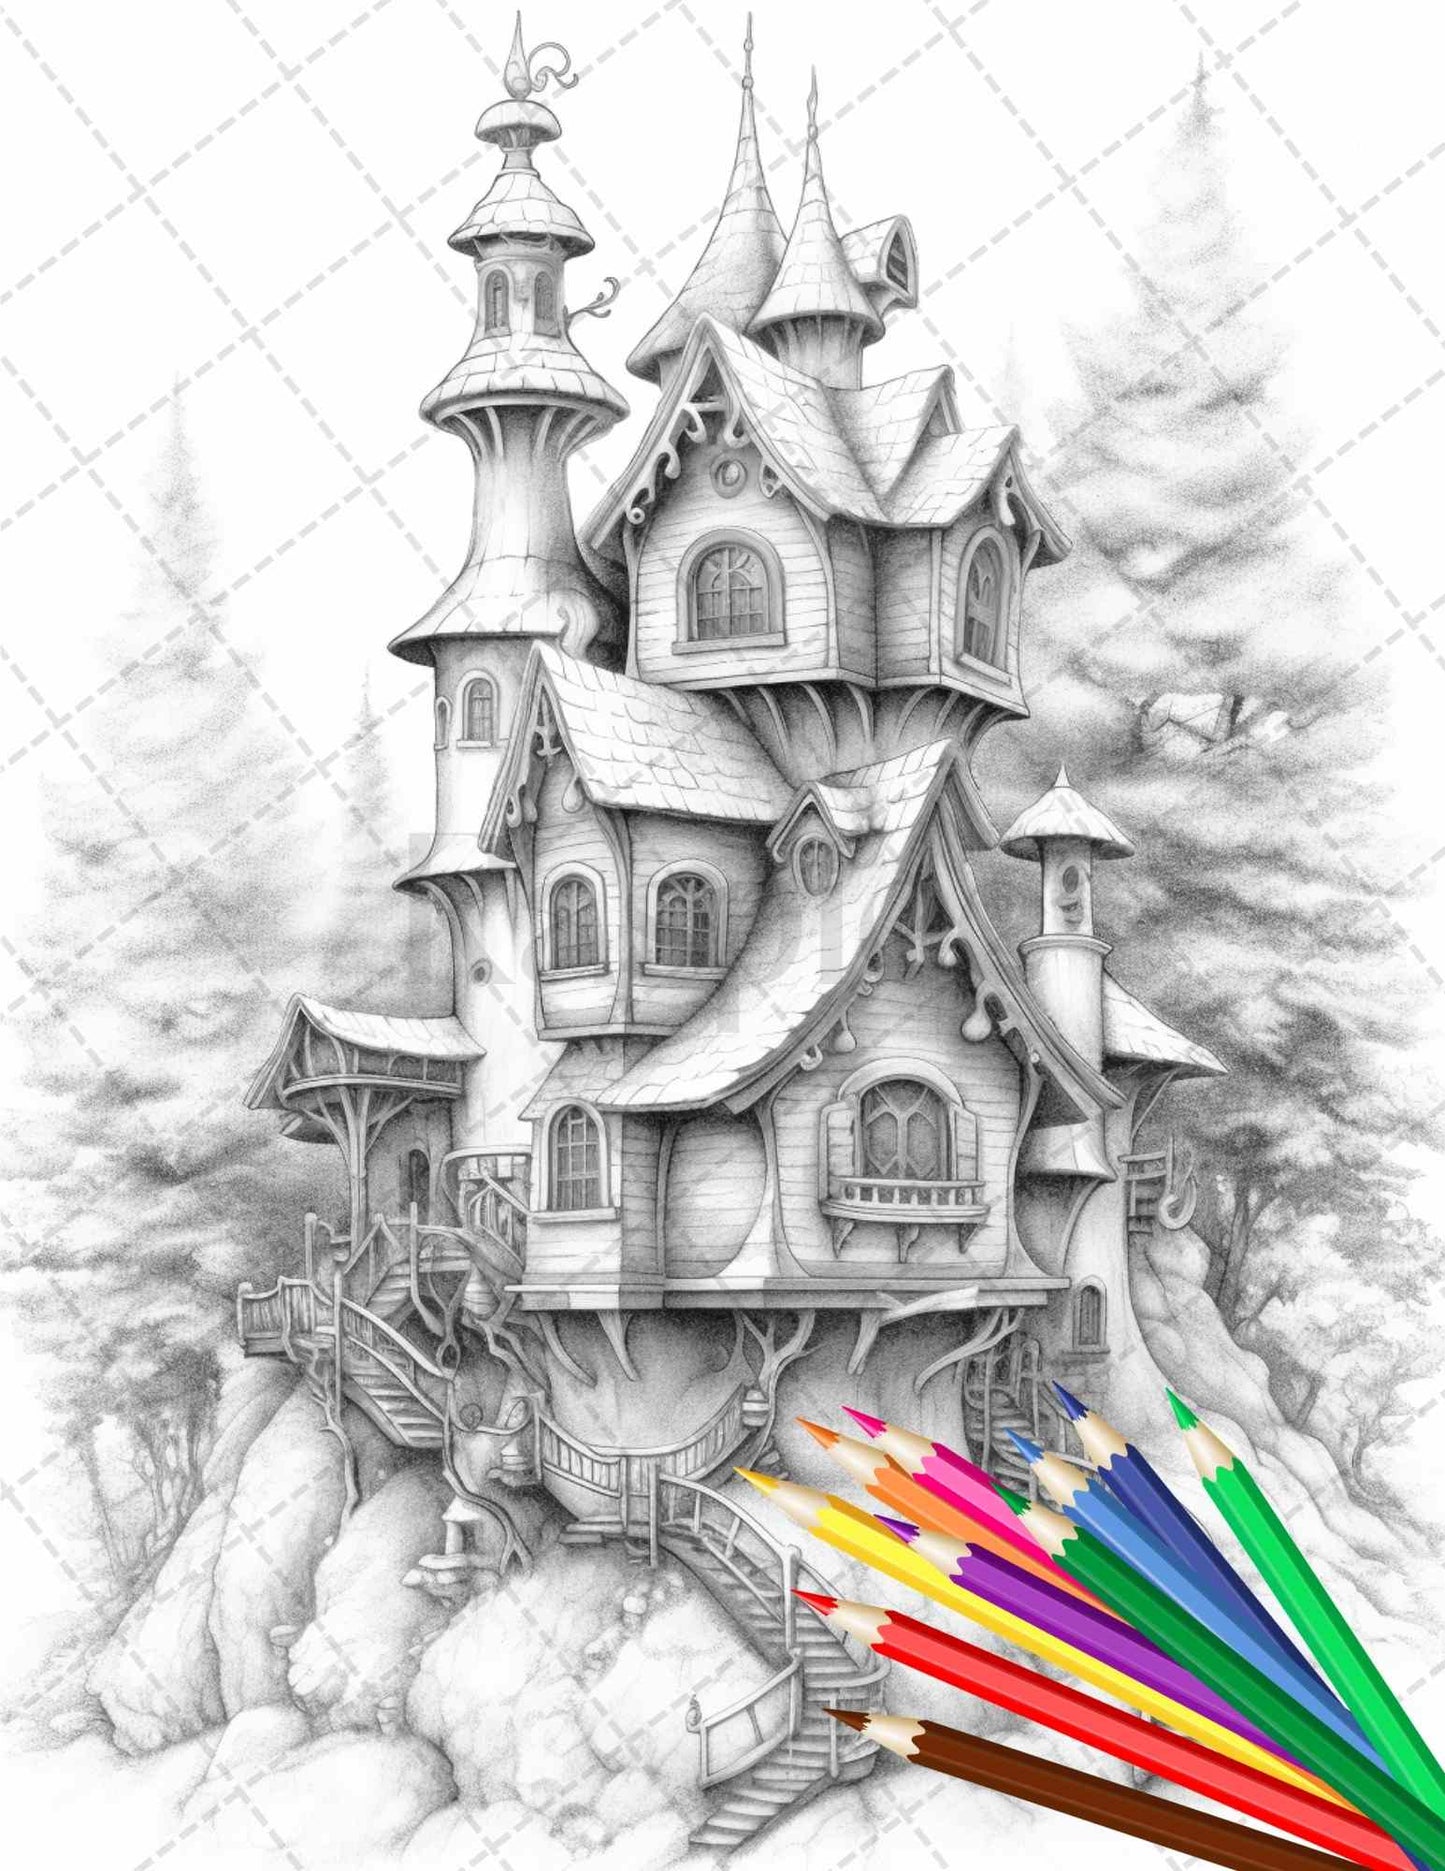 63 Winter Fairy Houses Grayscale Coloring Pages Printable for Adults, PDF File Instant Download - raspiee